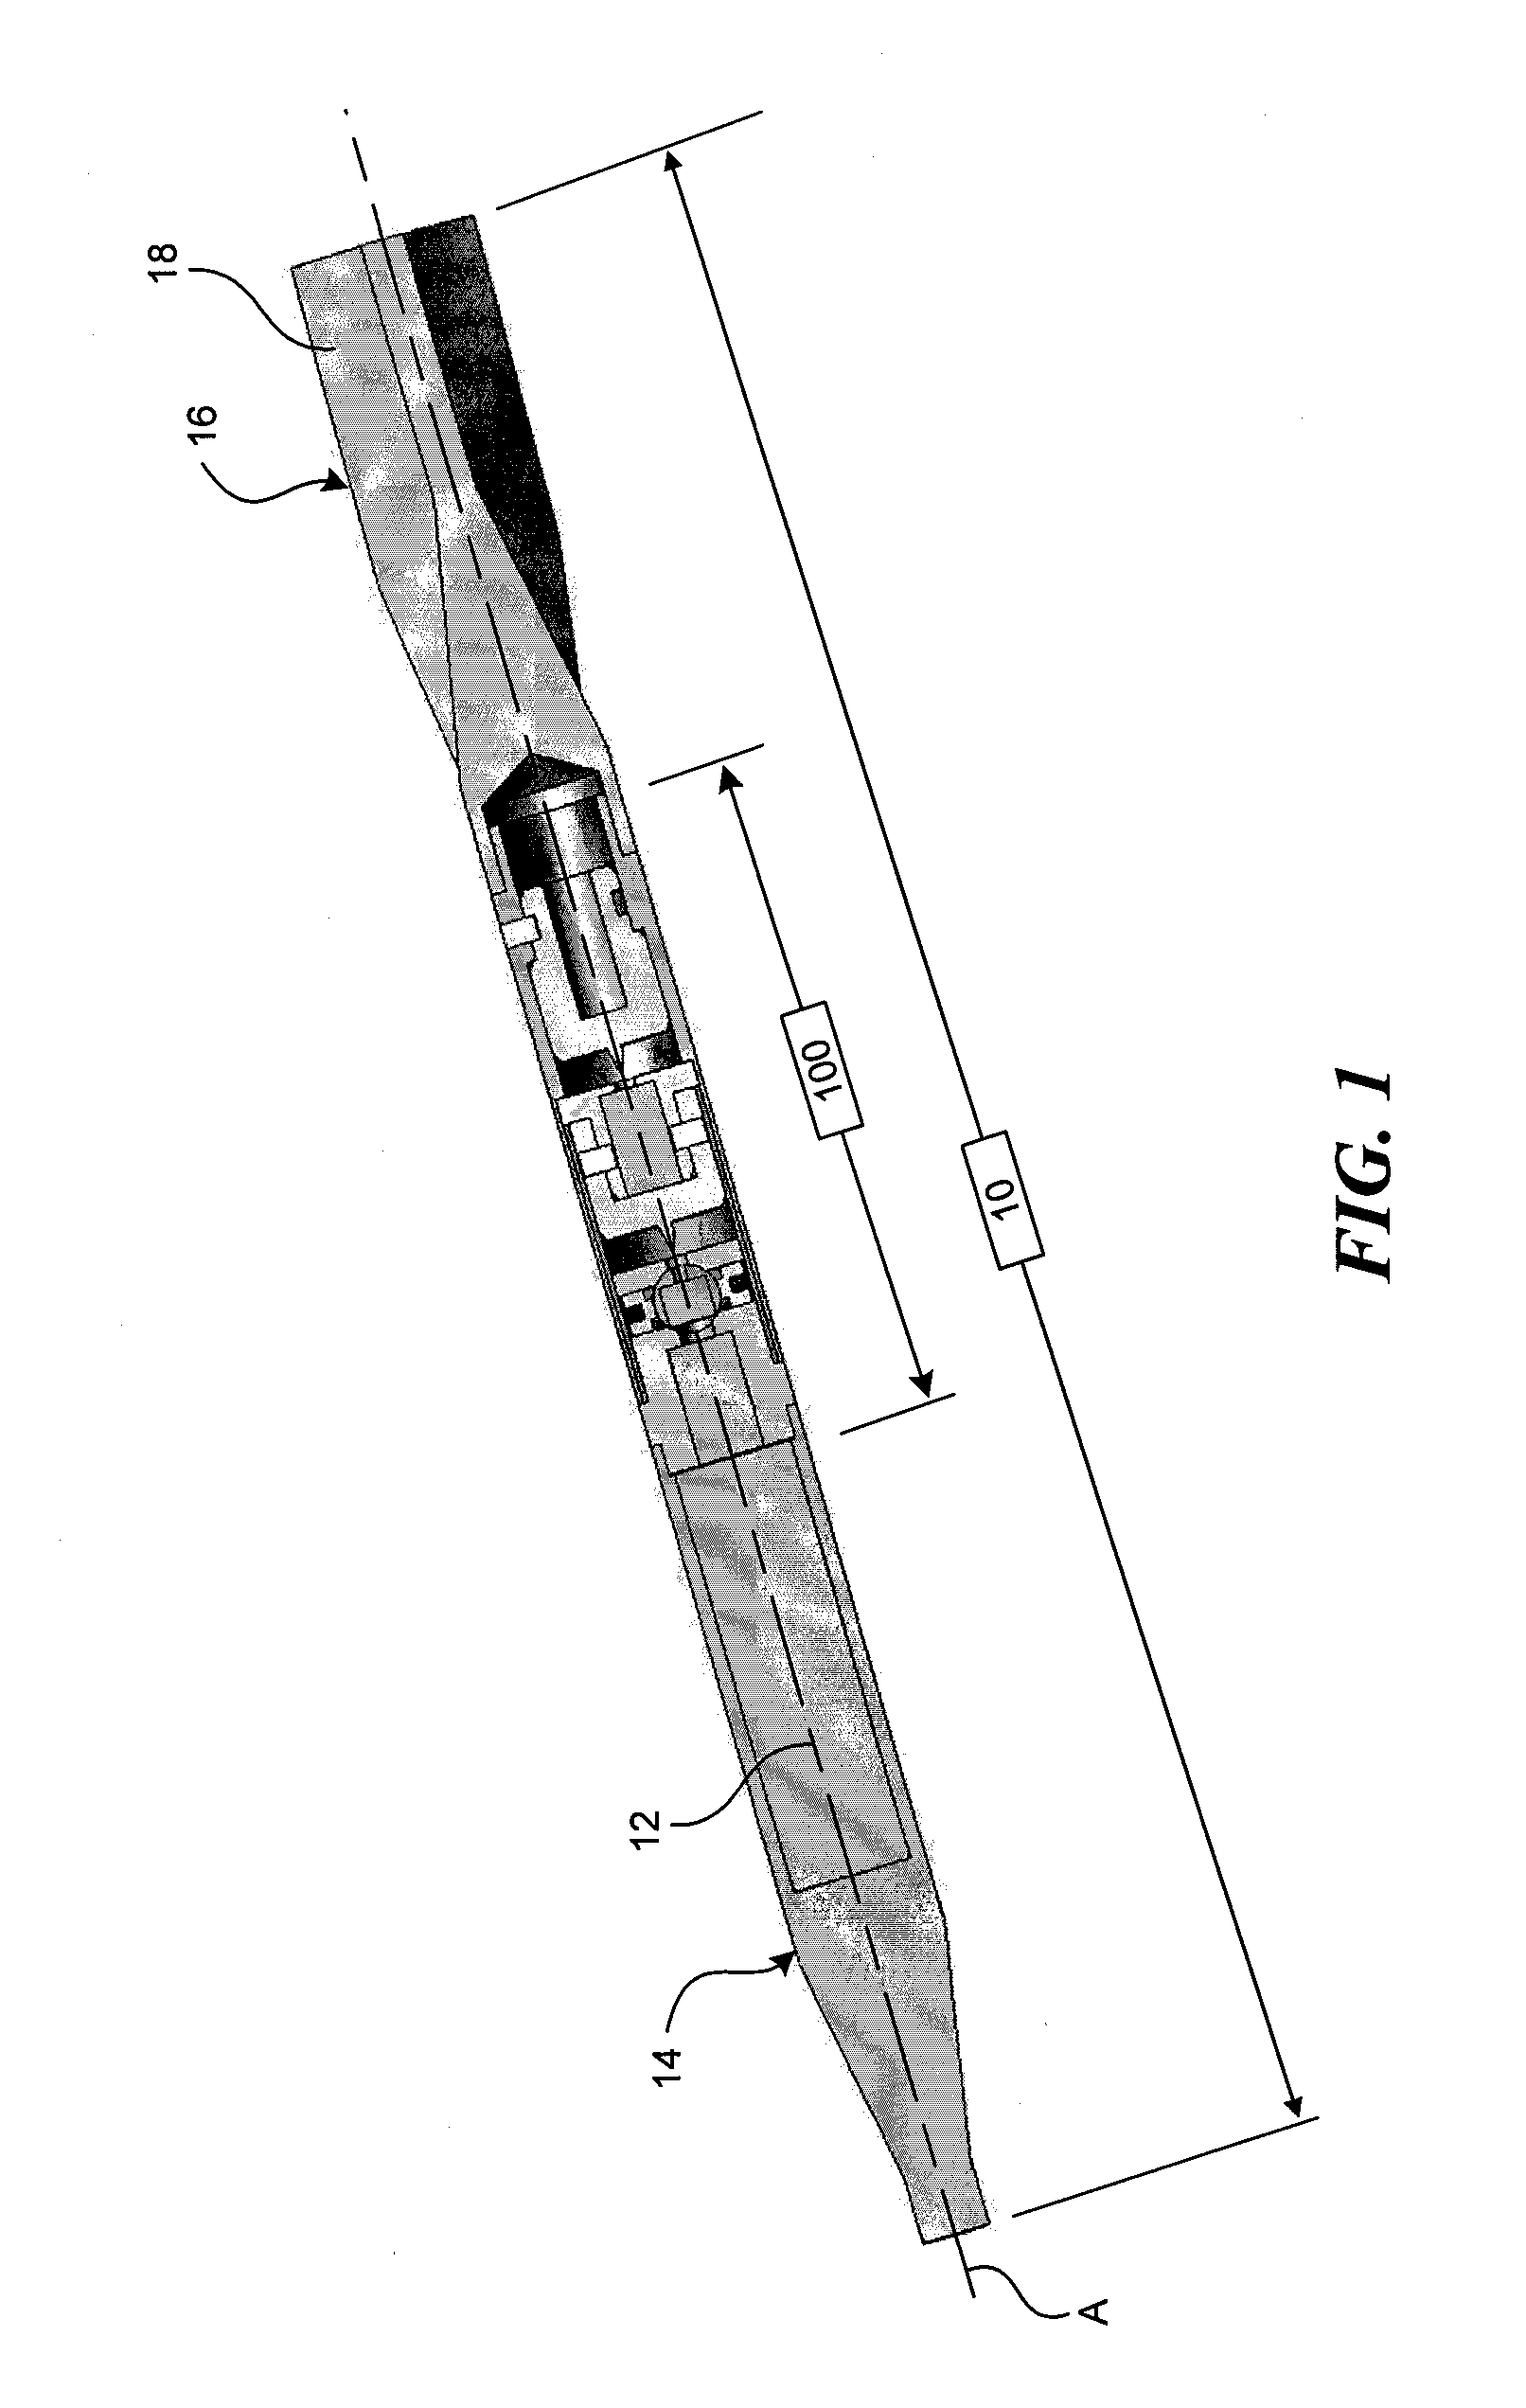 Safe and arm mechanisms and methods for explosive devices